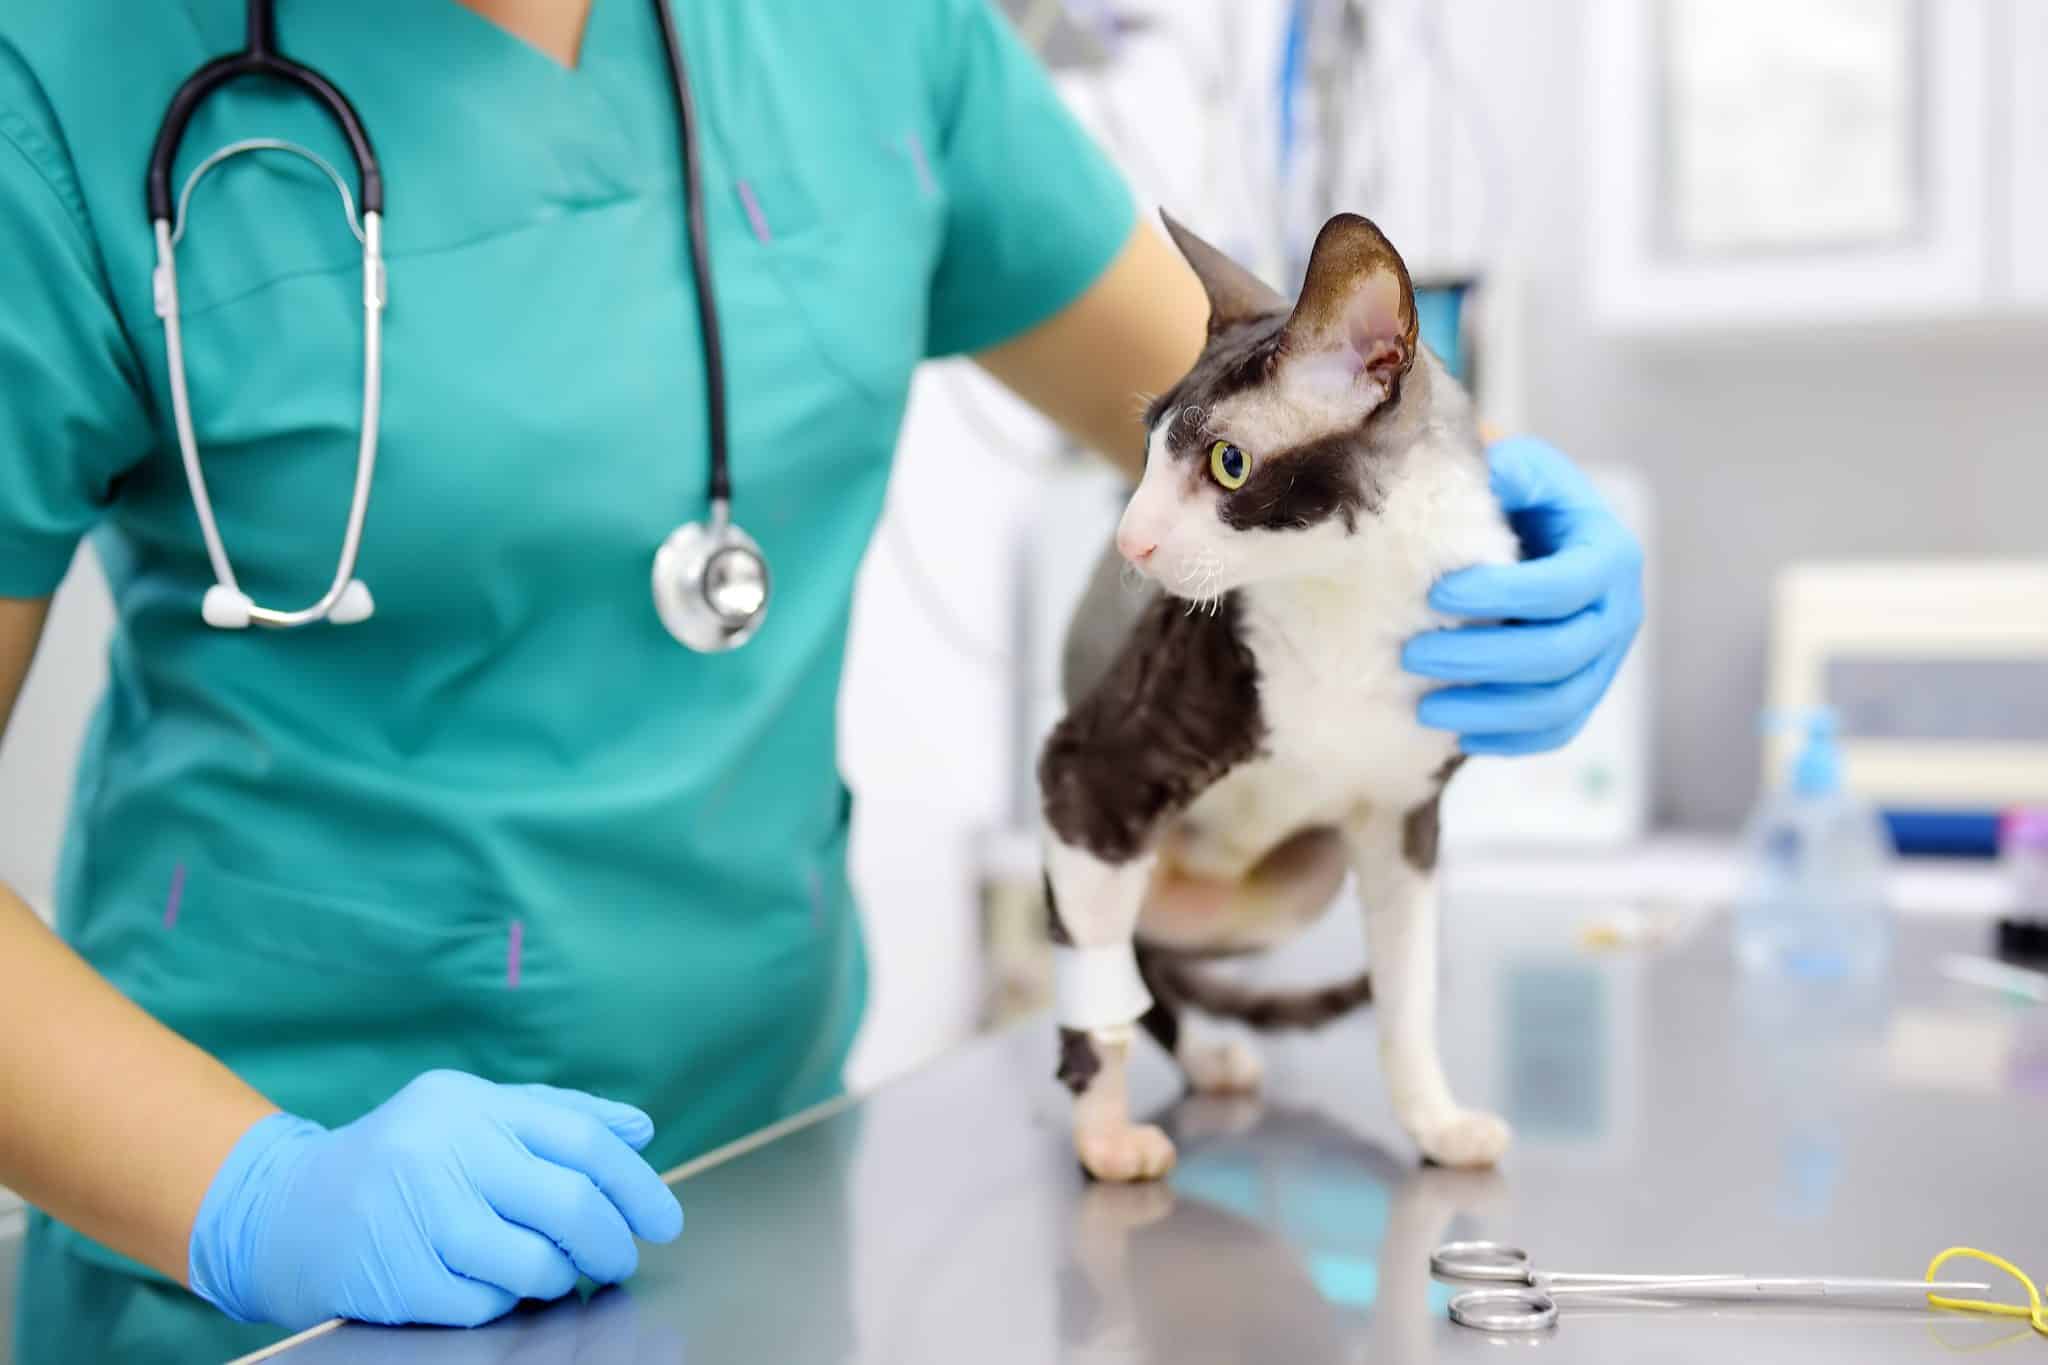 Veterinarian Examines A Cat Of A Disabled Cornish Rex Breed In A Veterinary Clinic. The Cat Has Only Three Legs.